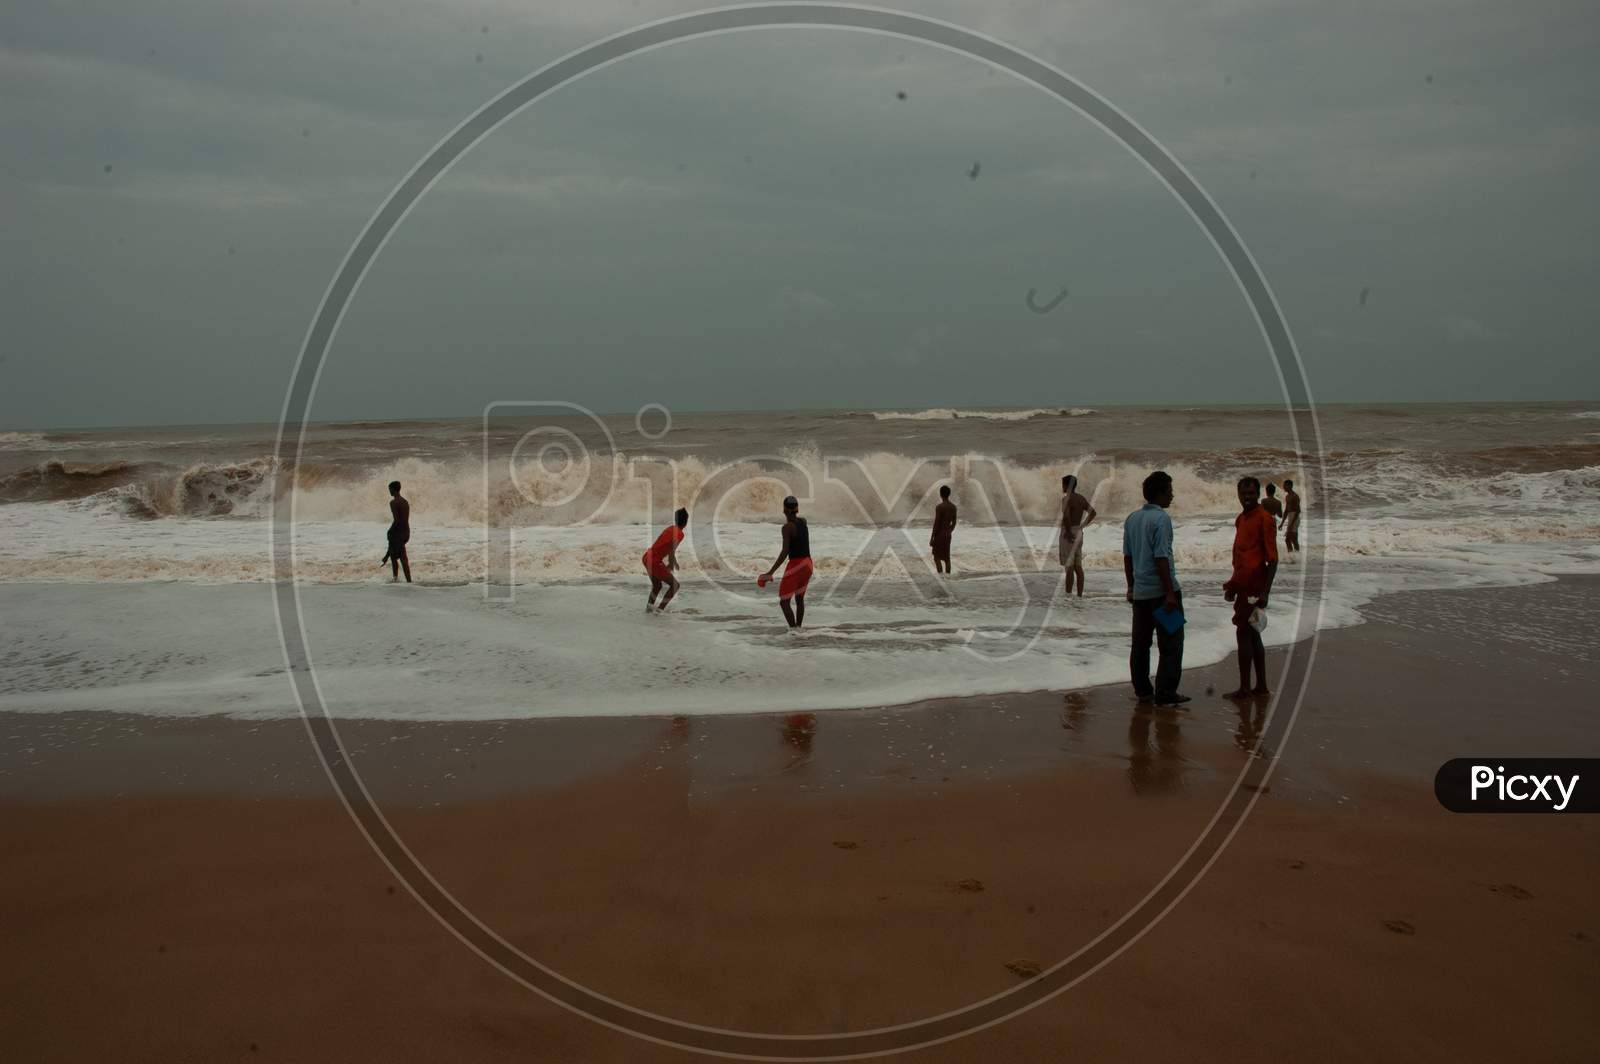 Group of Indian boys having fun by the beach